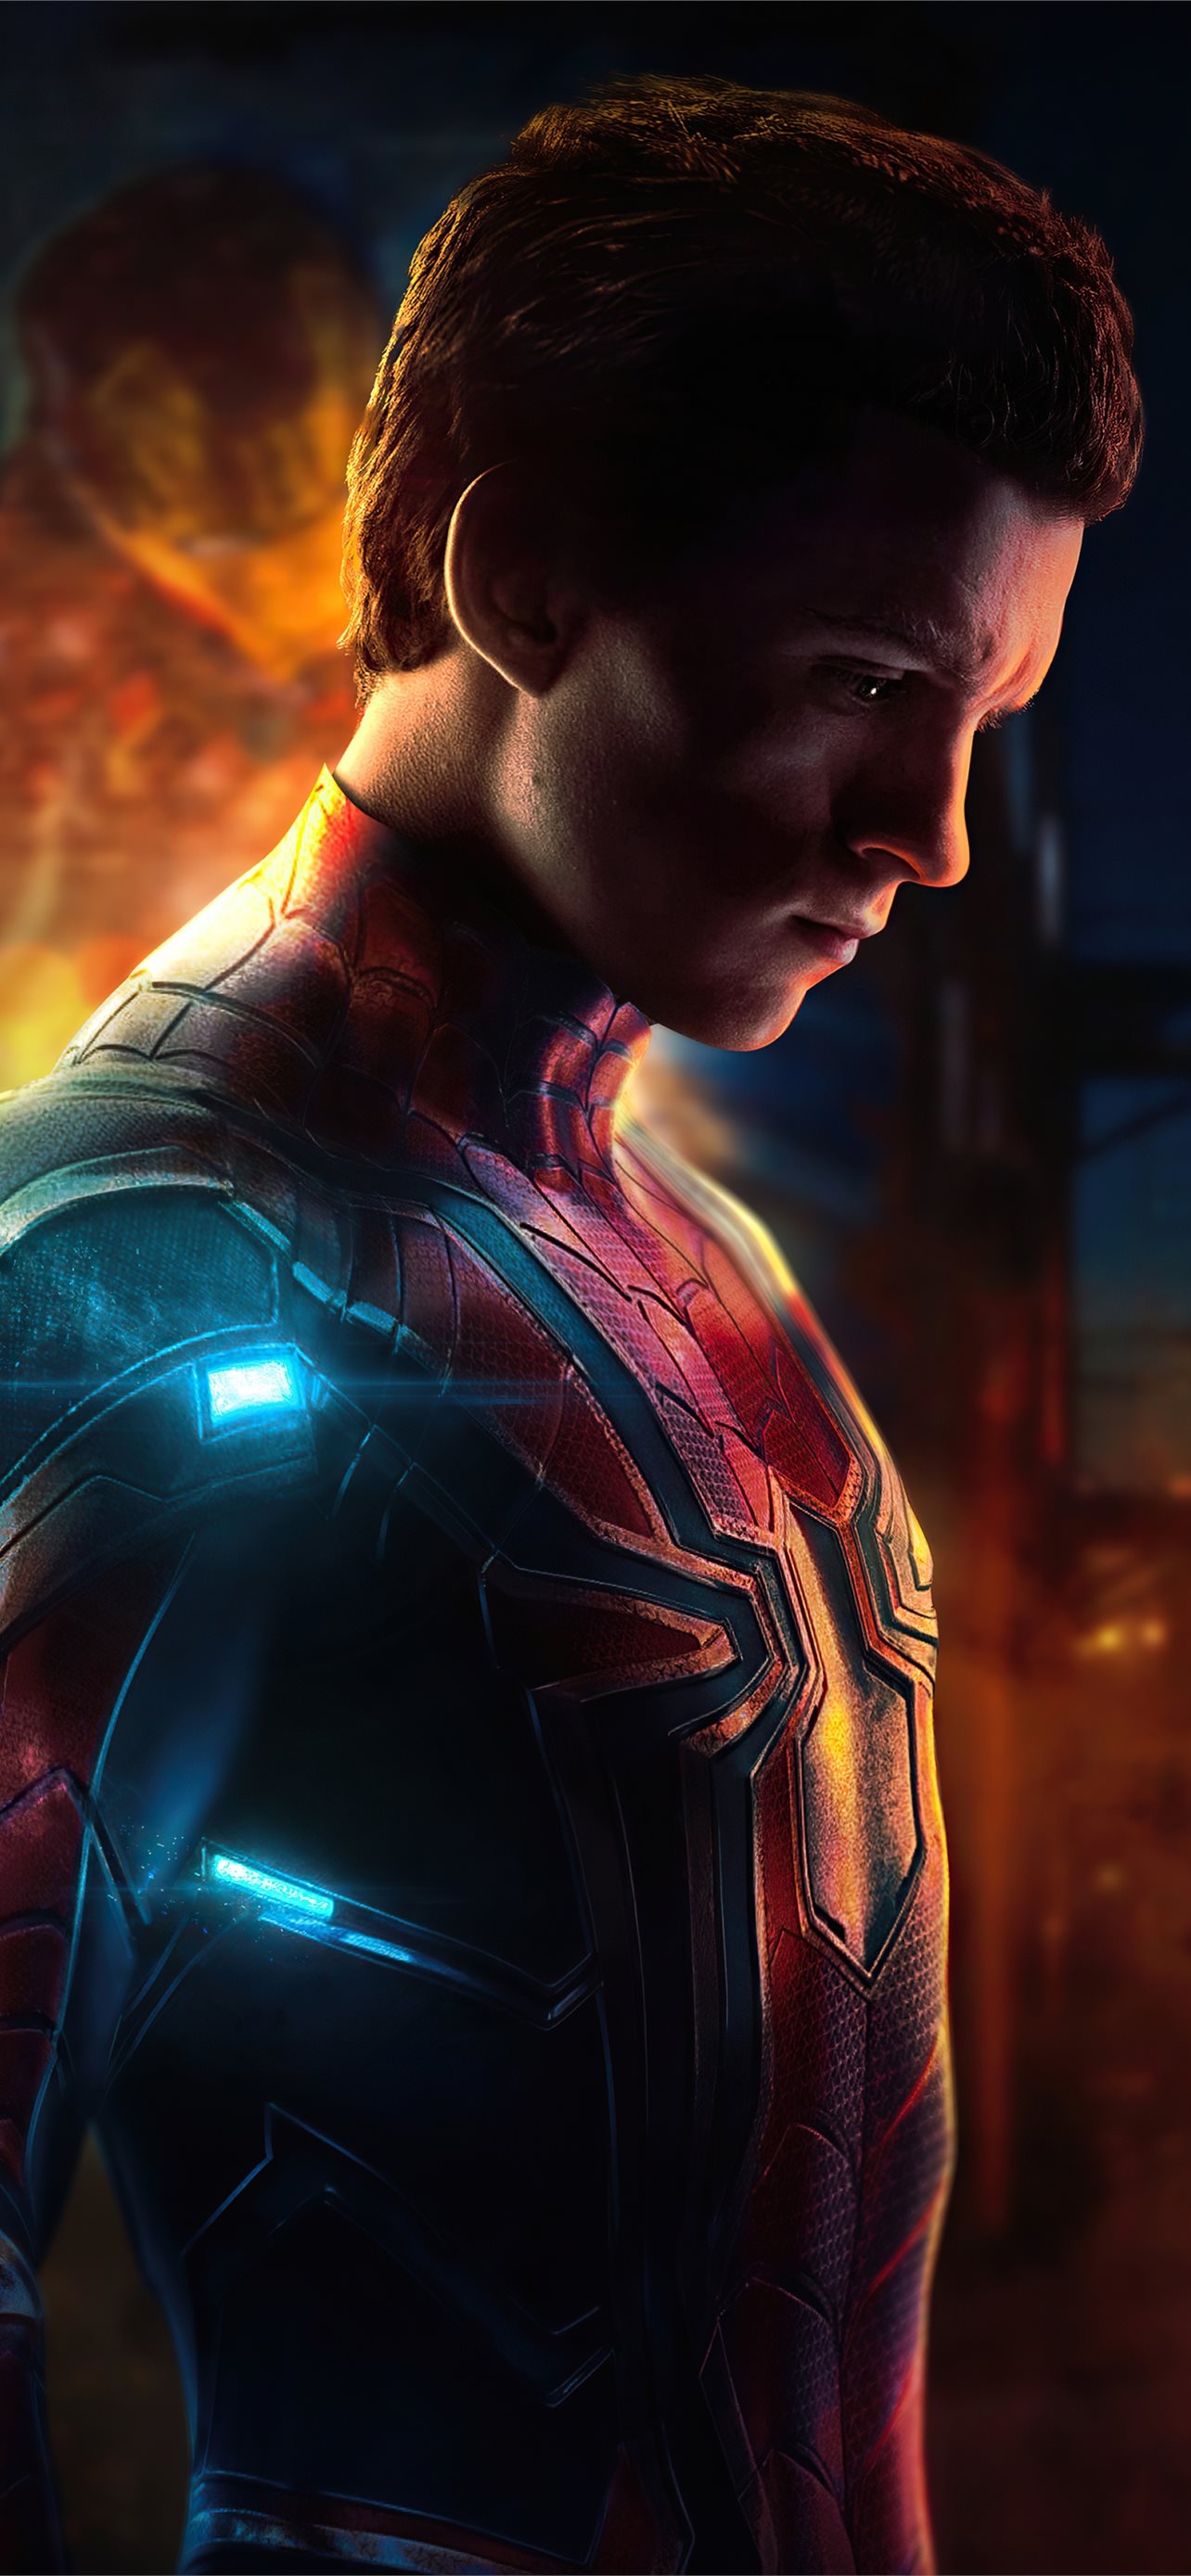 Tom Holland, Spider Man: No Way Home, iPhone wallpapers, Free download, 1290x2780 HD Handy